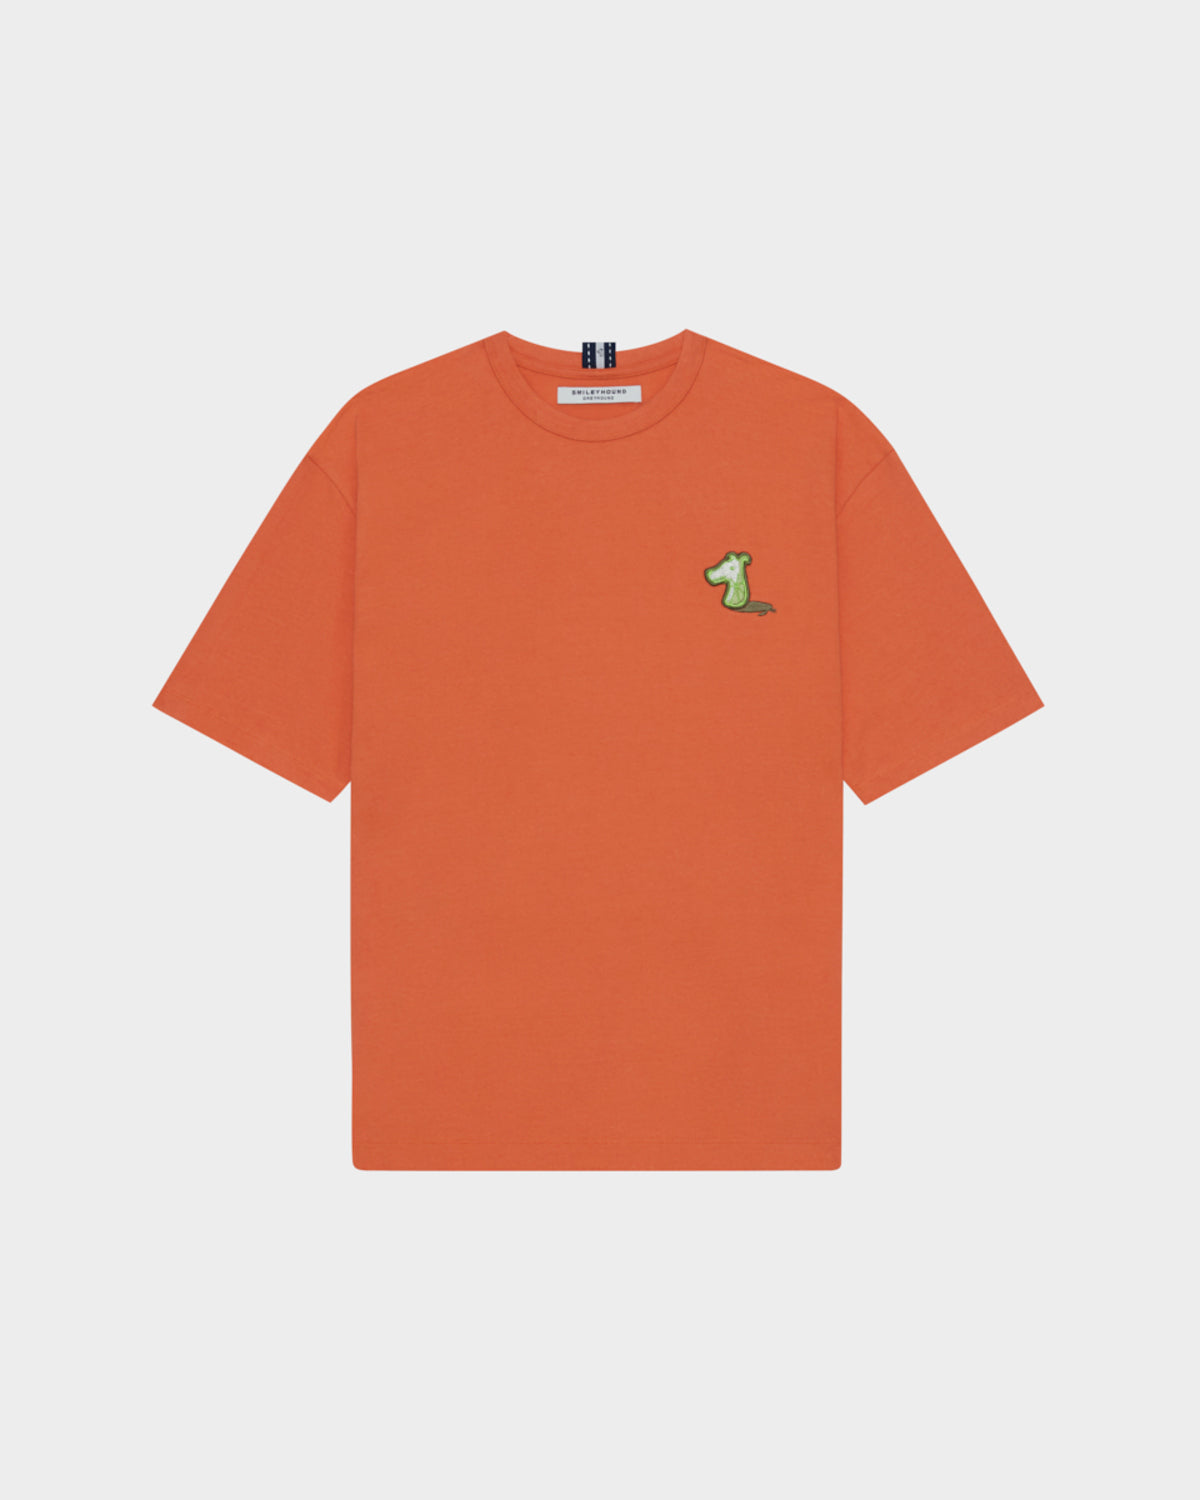 "COLOUR FRUITS" T- SHIRT WITH LOGO EMBROIDERED